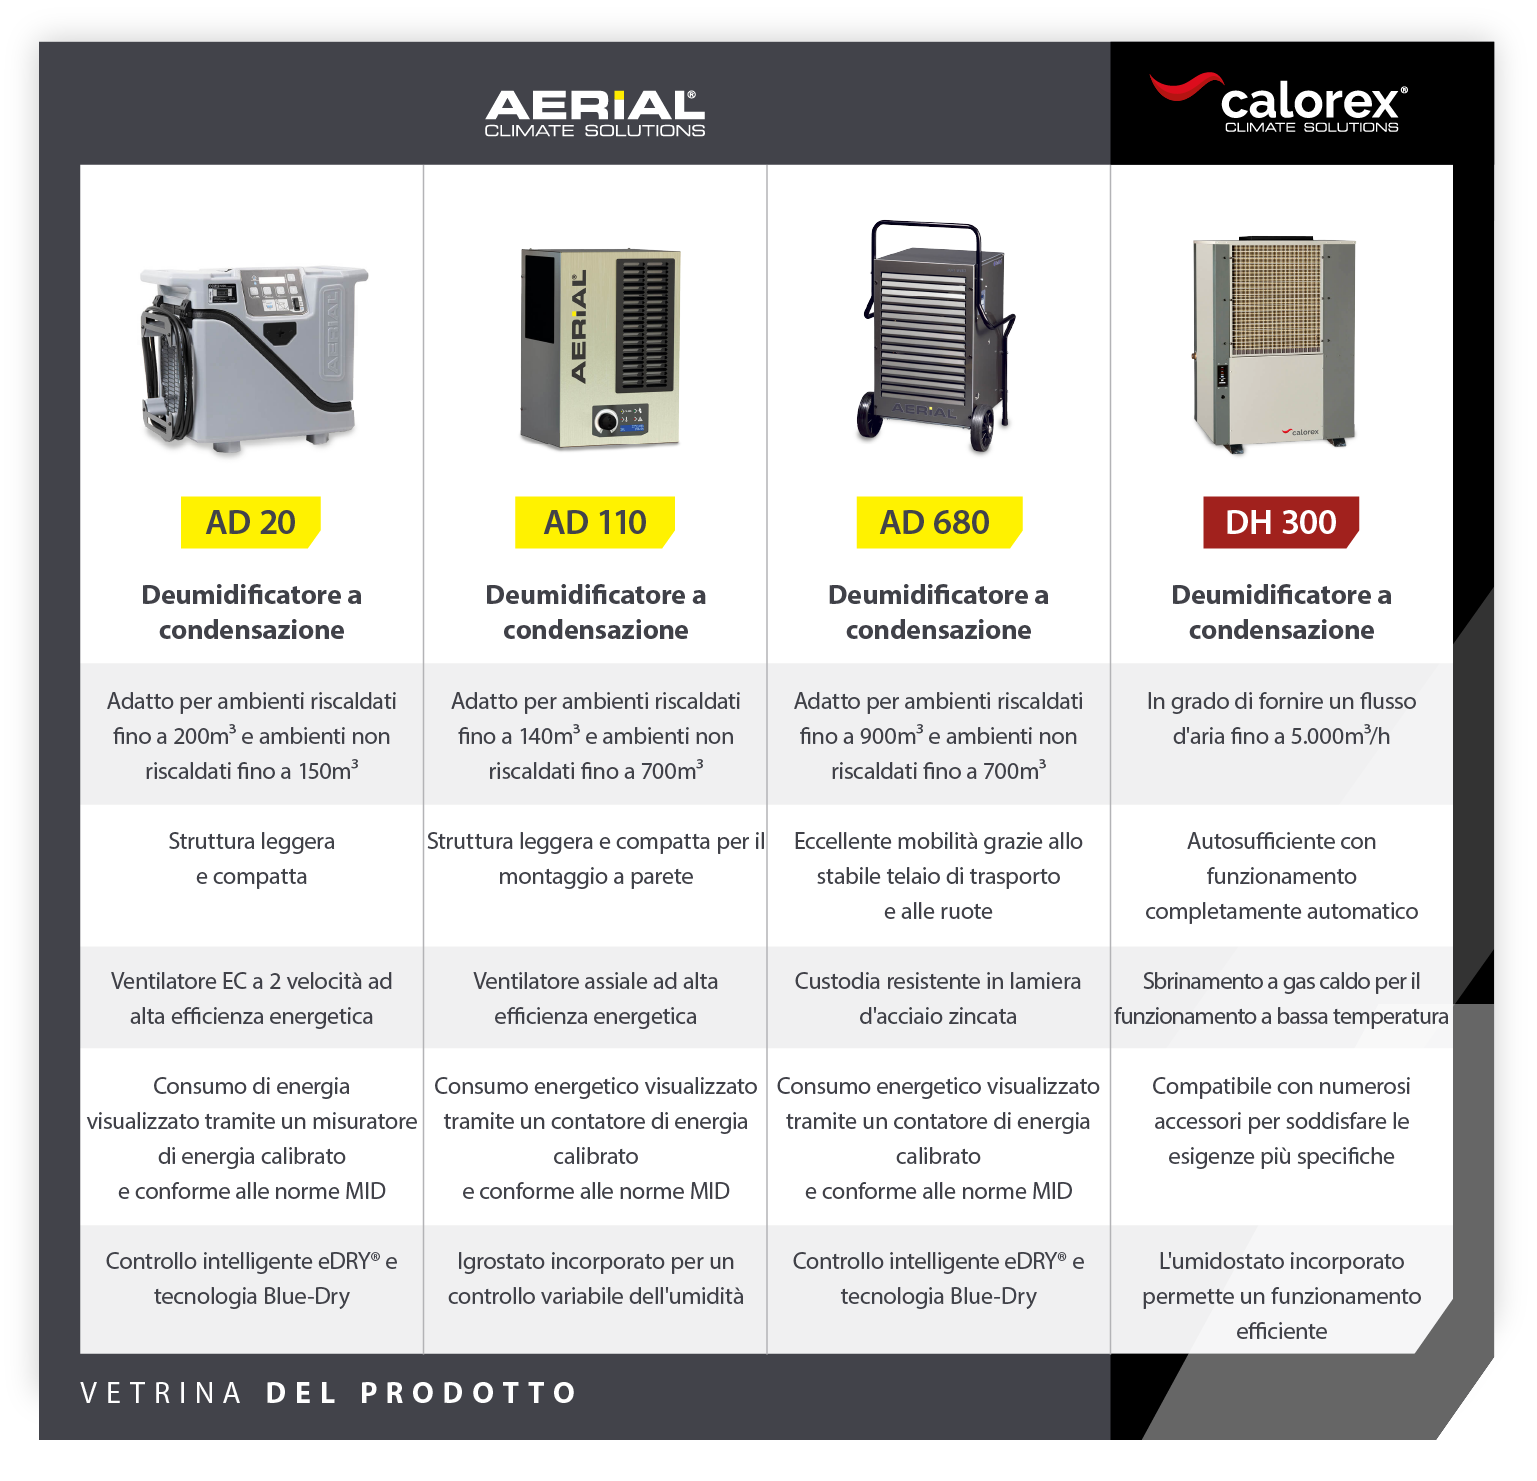 Heritage site dehumidifiers product showcase of 4 condensation dehumidifiers - Infographic image